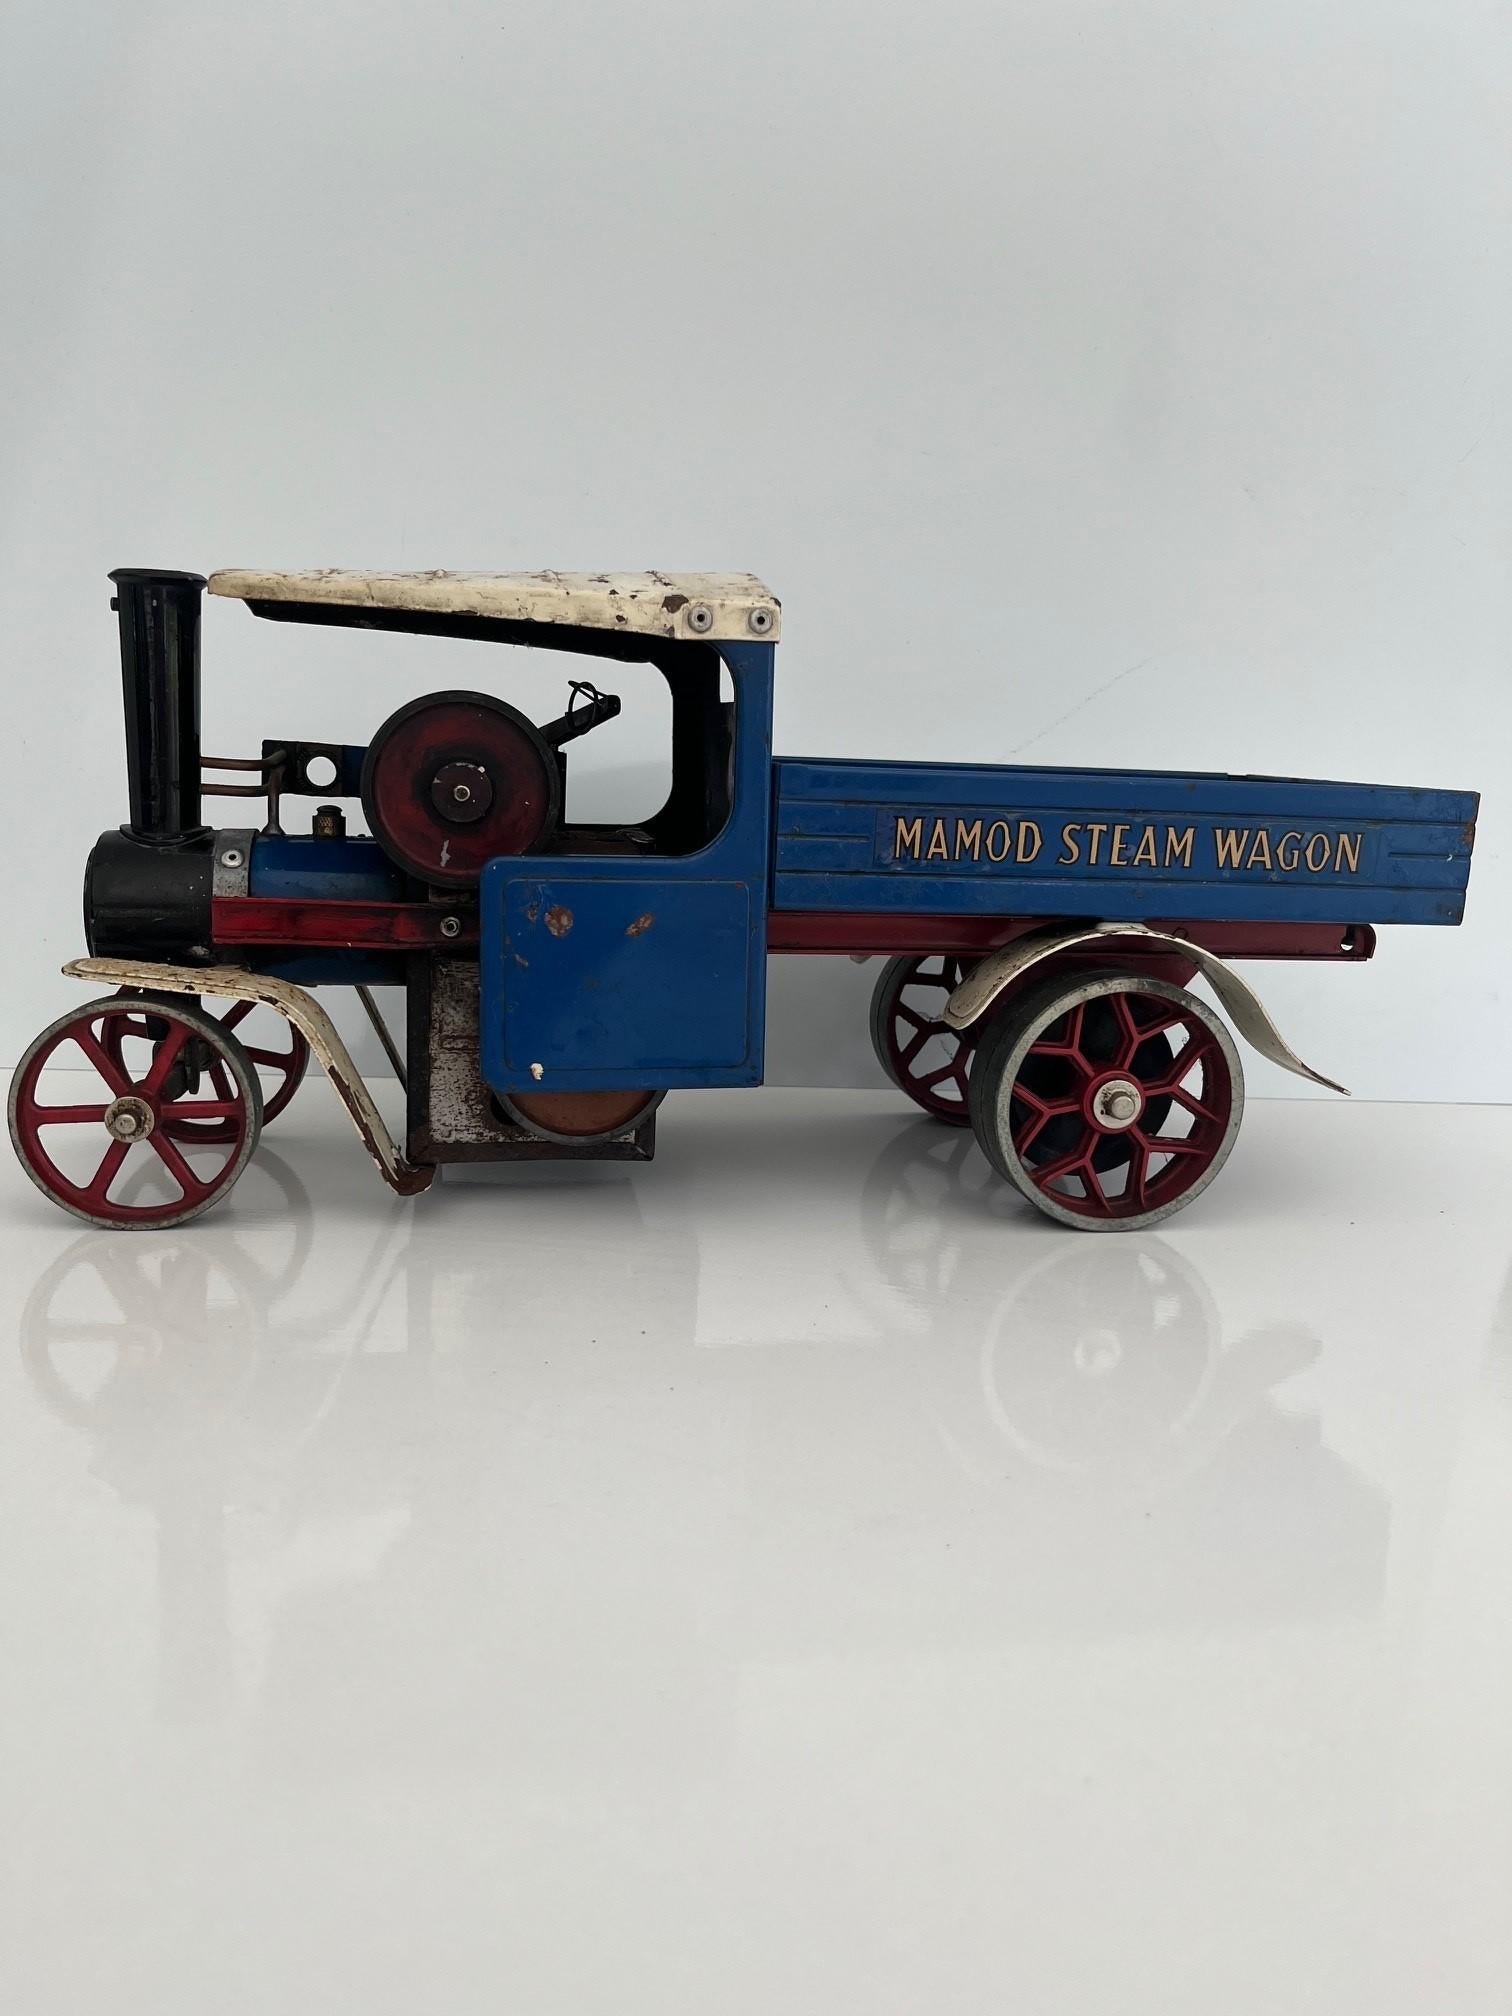 A lovely old British Made Vintage Steam Engine Model.  The piece has good scale and a beautiful vintage patina, ideal as an art piece or shelf model.
The item dates to circa 1970s when these where popular as working toys, with actual running parts,